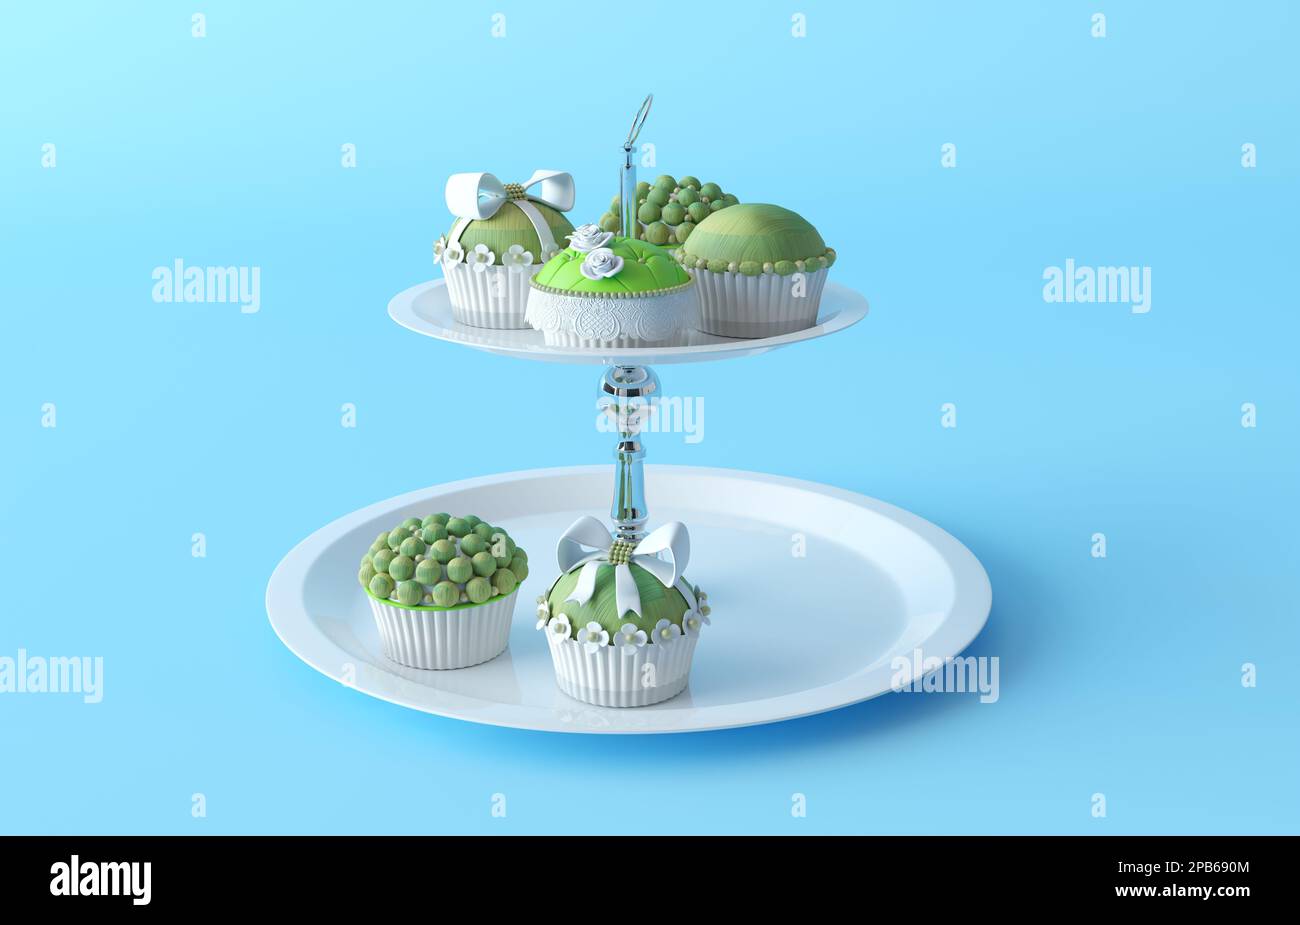 Illustration of a cupcake stand with cupcakes. Plastic decorated green cupcakes with bow and balls on a metal round multi-level stand. 3d render Stock Photo